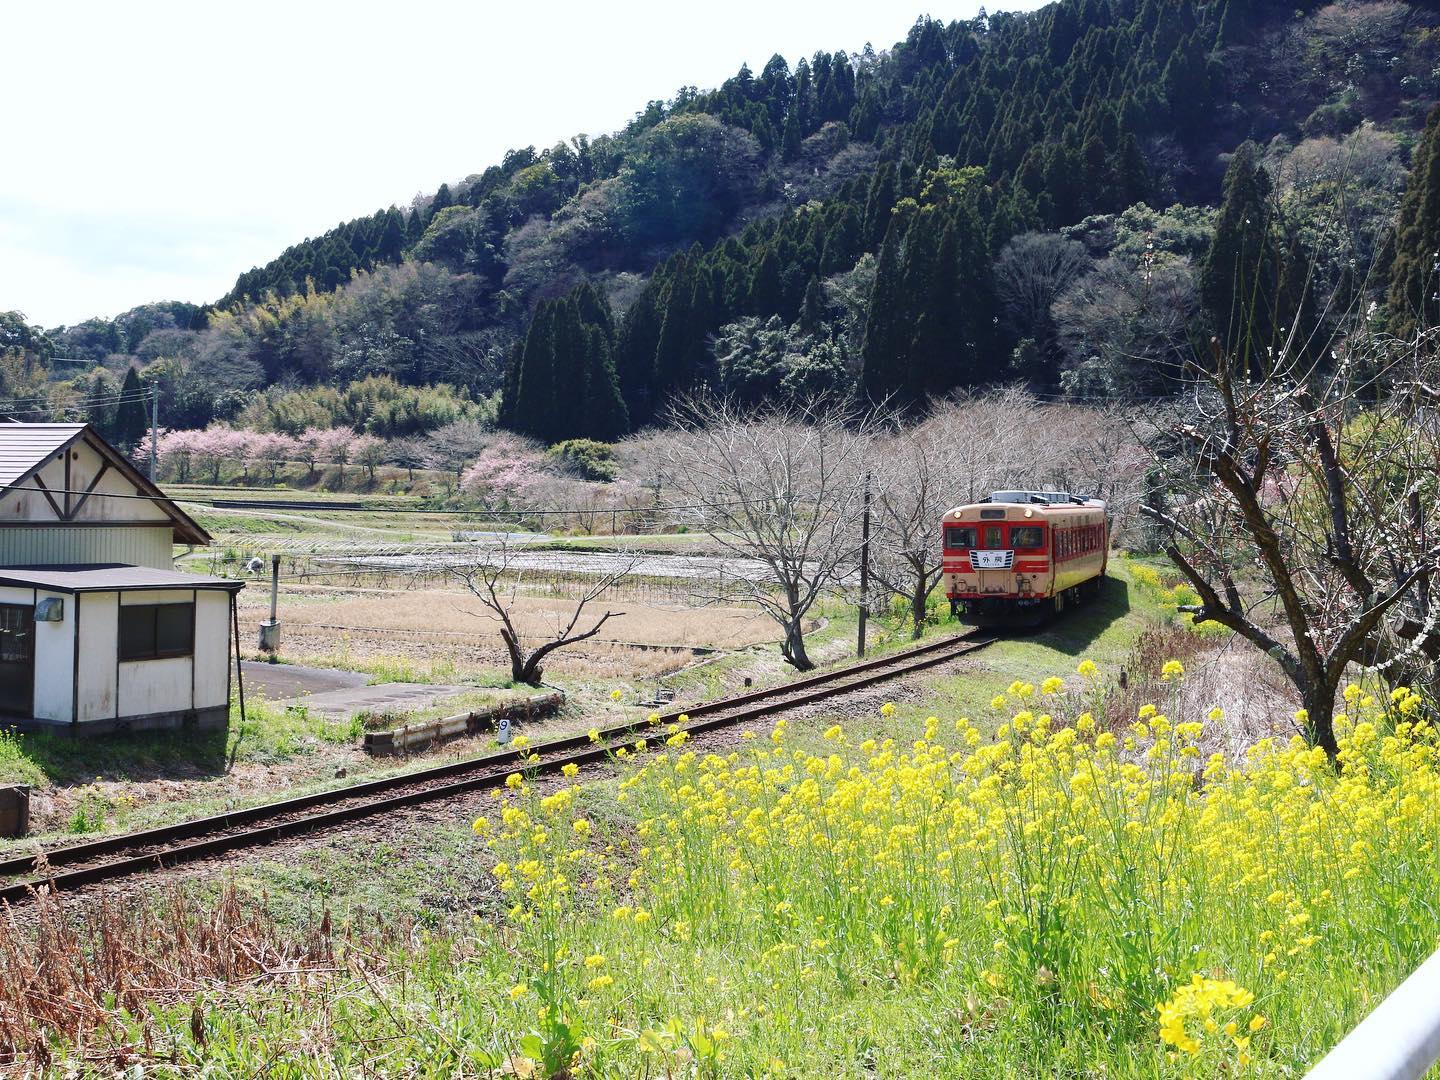 _⁣
The photo for today’s  #shootinjapan by AOI Global was shot near a small train station in Chiba prefecture📸 
The idyllic small towns of Japan offer a completely different view from the bustling streets of Tokyo How cute is this little train!

#aoiglobal  #filmproduction  #productioncompany  #filmmakersworld  #productionservices  #shootinglocation  #filmwork  #filmmakinglife  #weeklyinspiration 